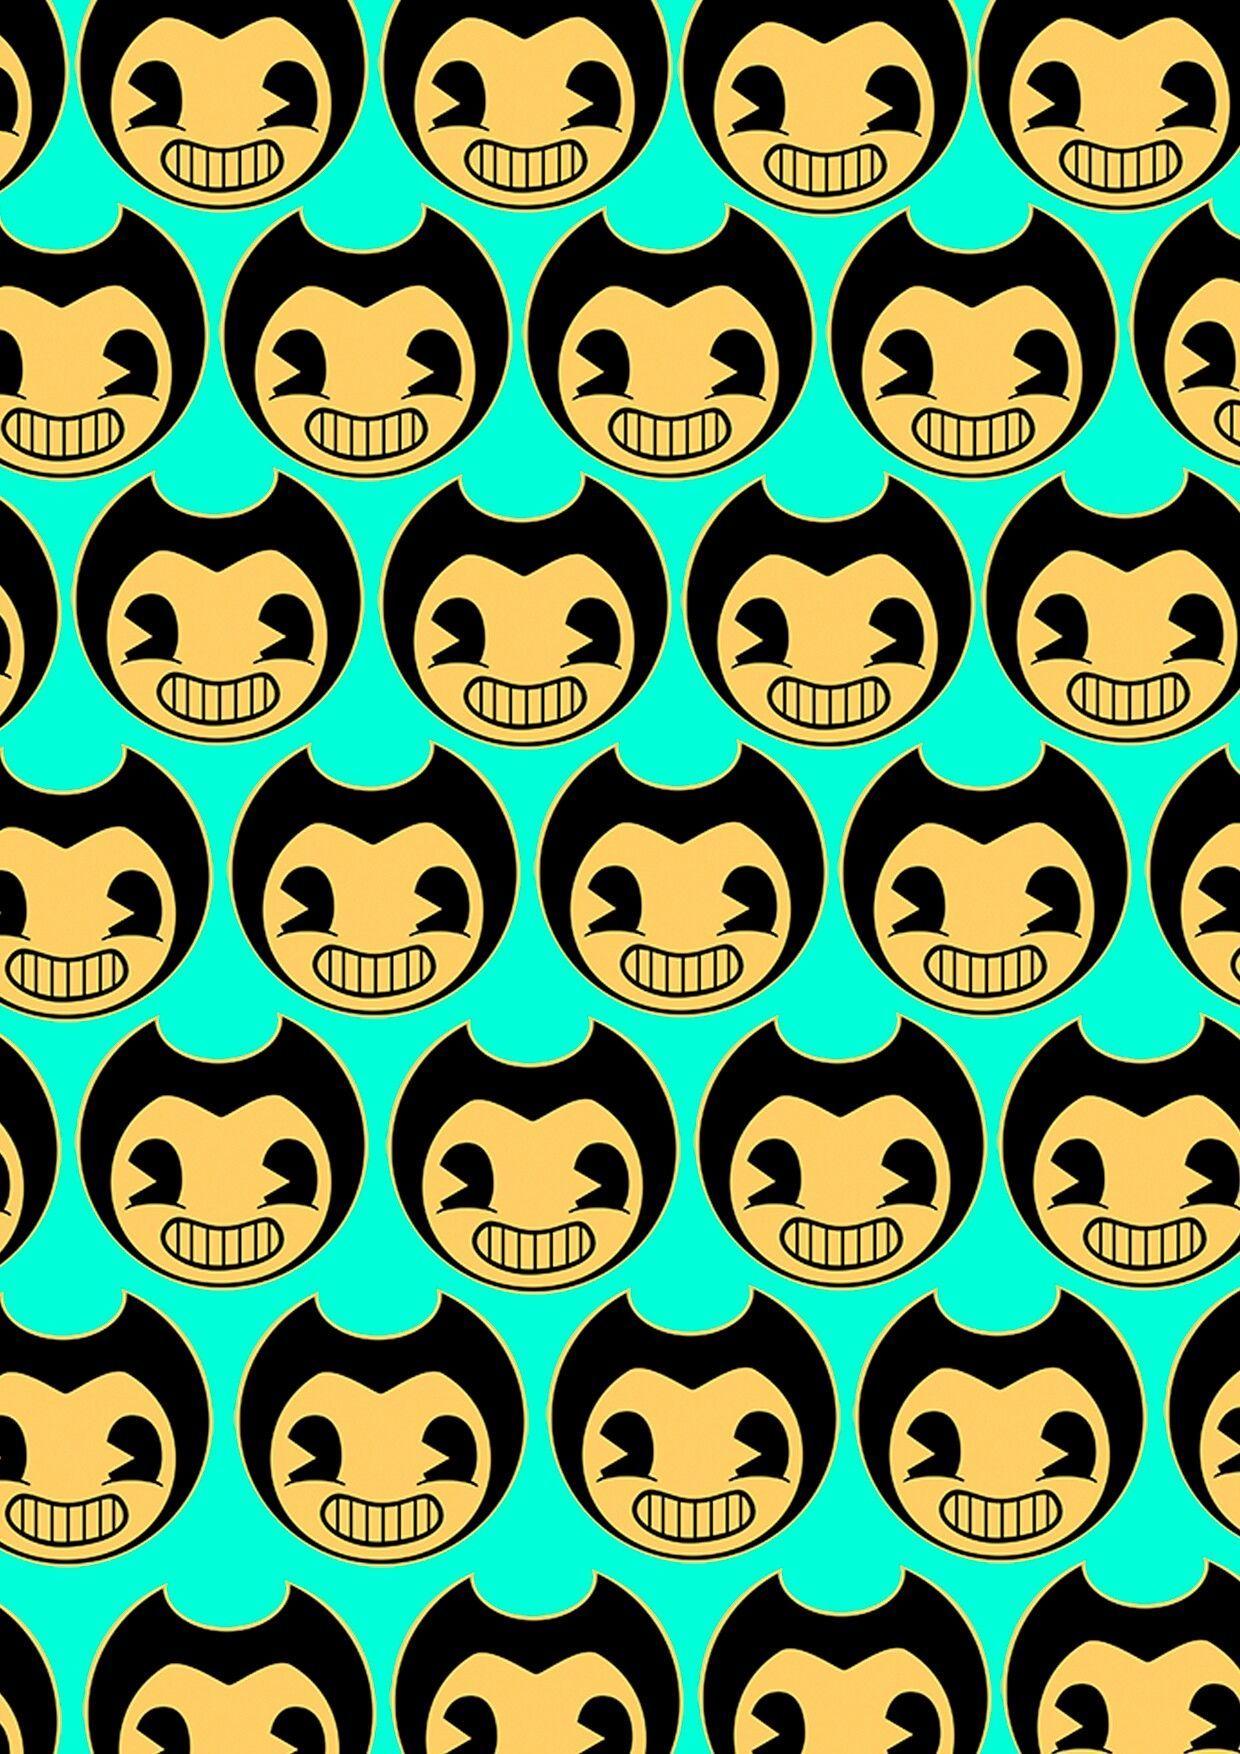 Bendy and The Ink Machine Wallpaper. Jace. Wallpaper